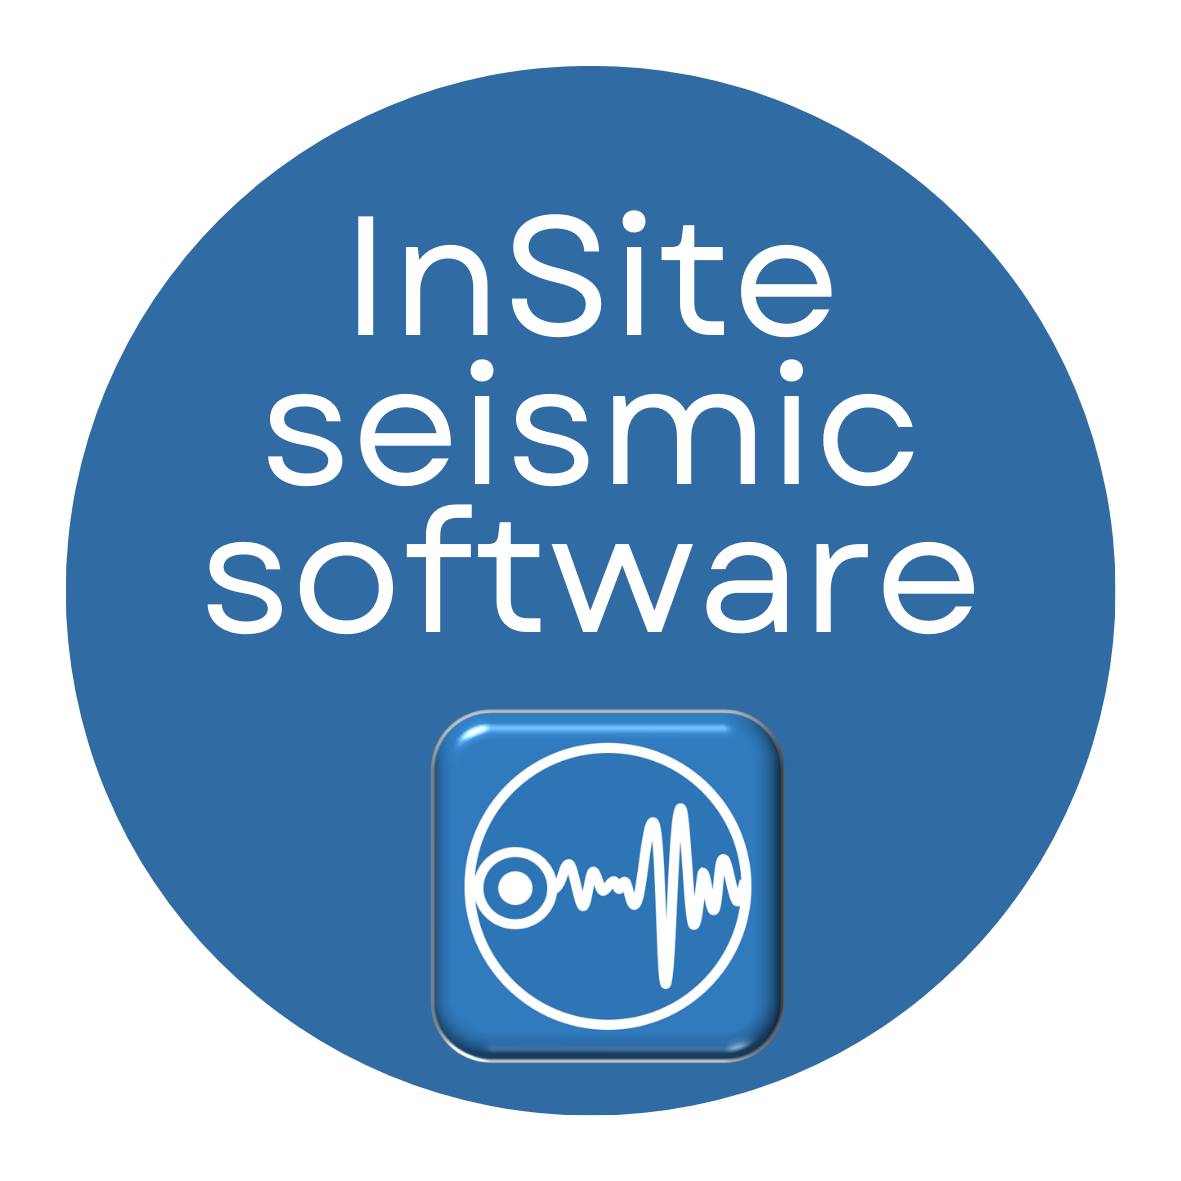 Software solution integrating detection, processing, analaysis and management of seismic and acoustic data